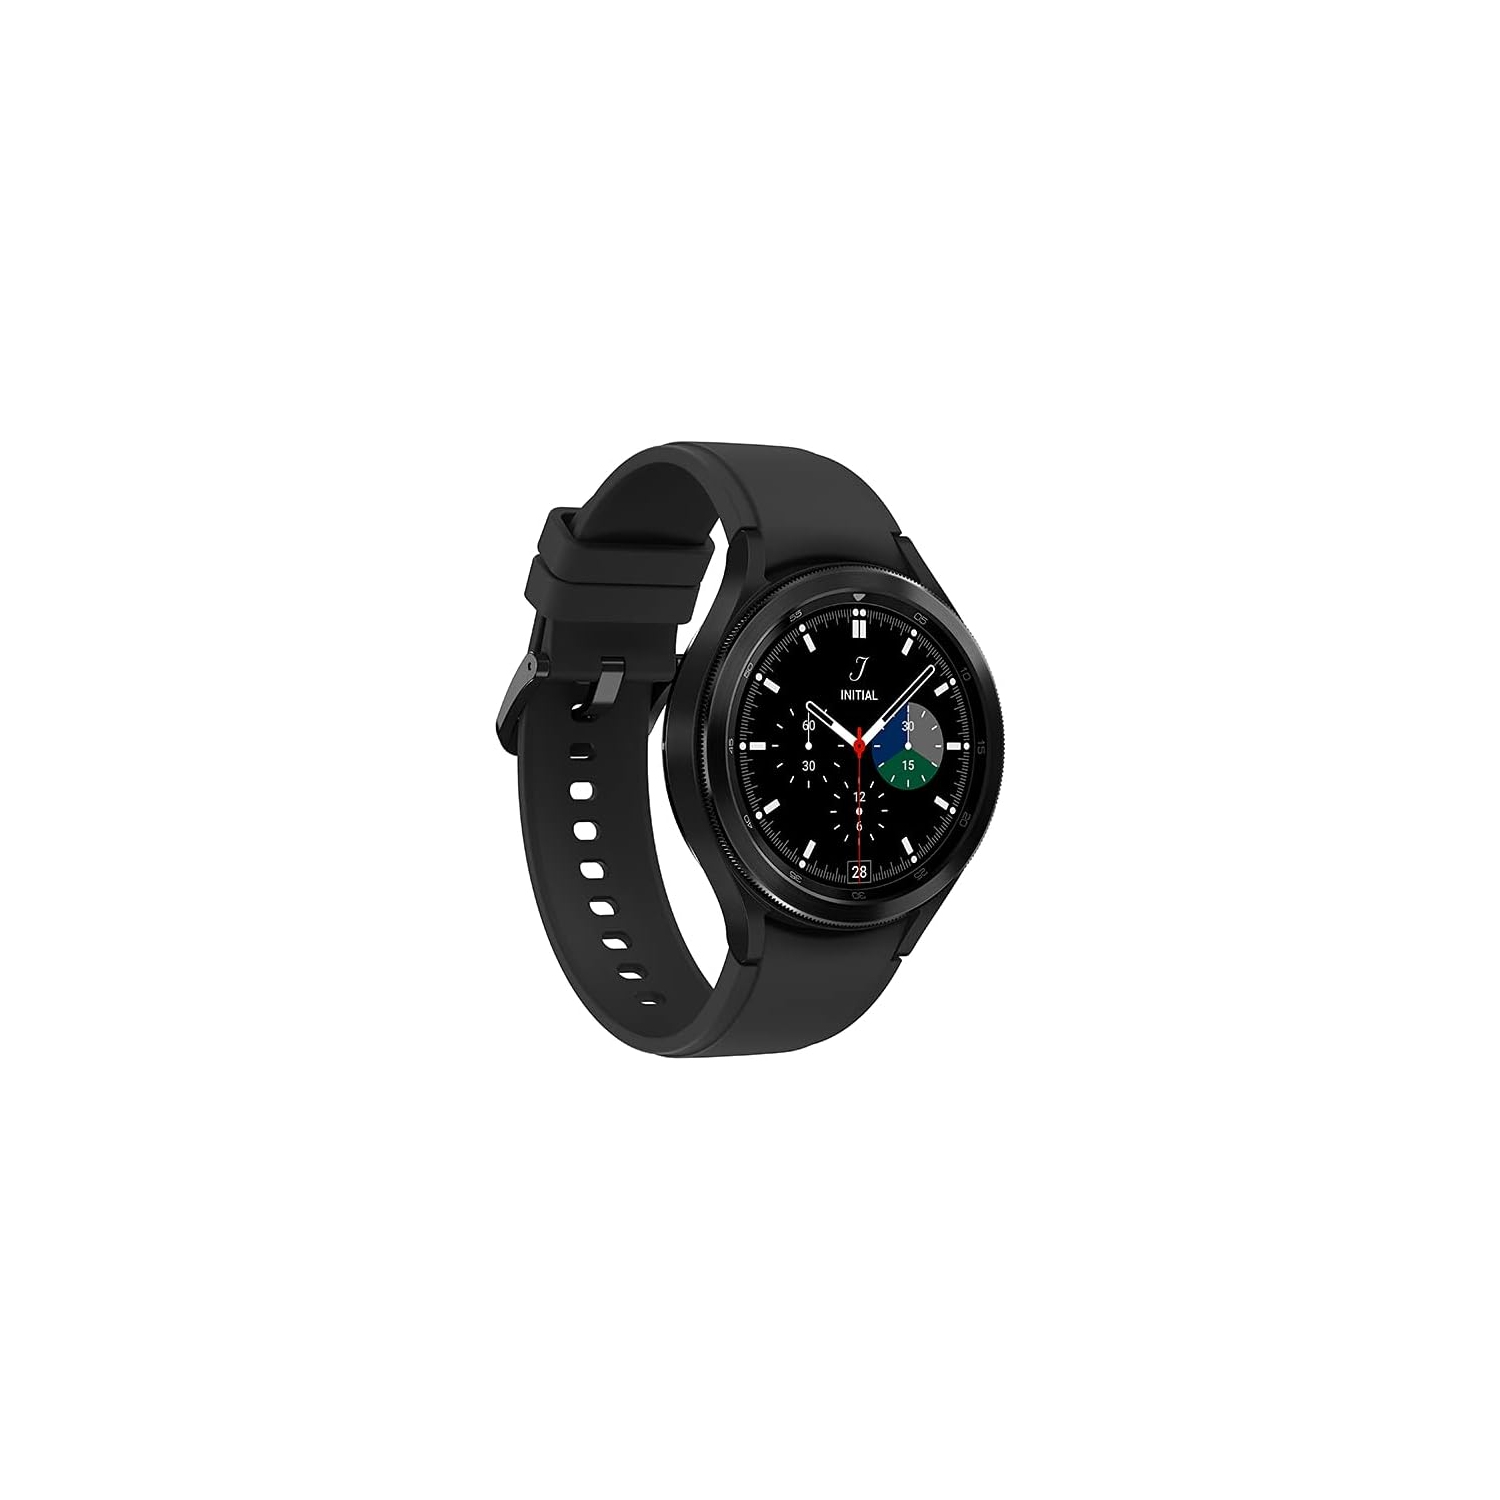 Refurbished (Excellent) - Samsung Galaxy Watch4 Classic - 46mm - Black Stainless Steel - Google Wear OS, 1.36" Round Display